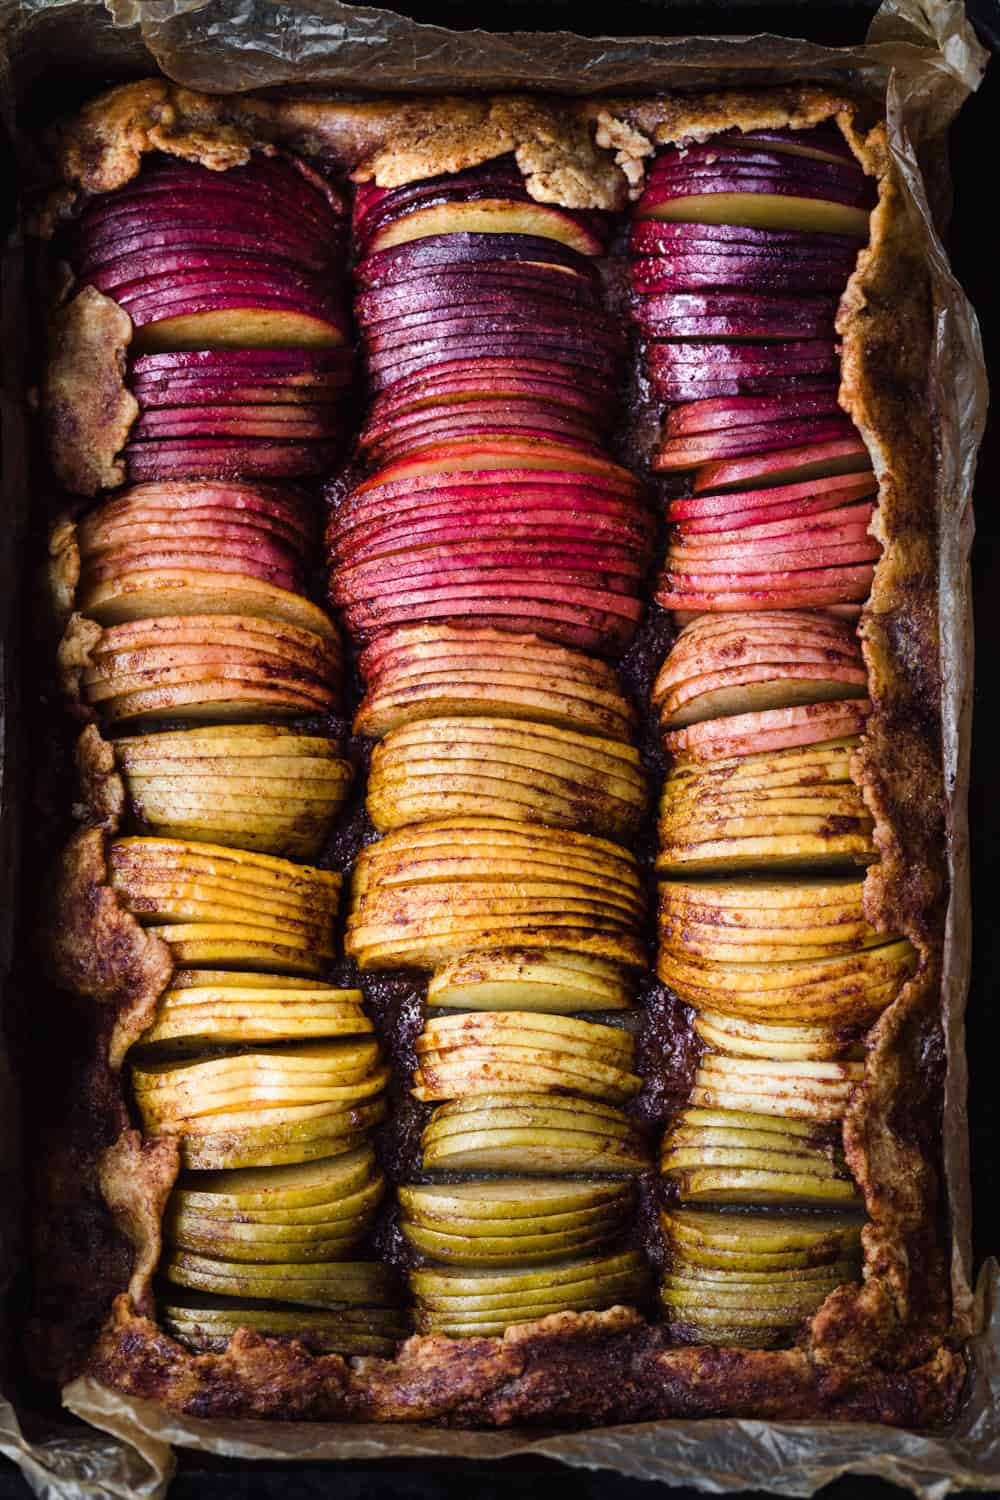 Spiced rainbow apple galette with purple, red, pink, orange and green apple slices.